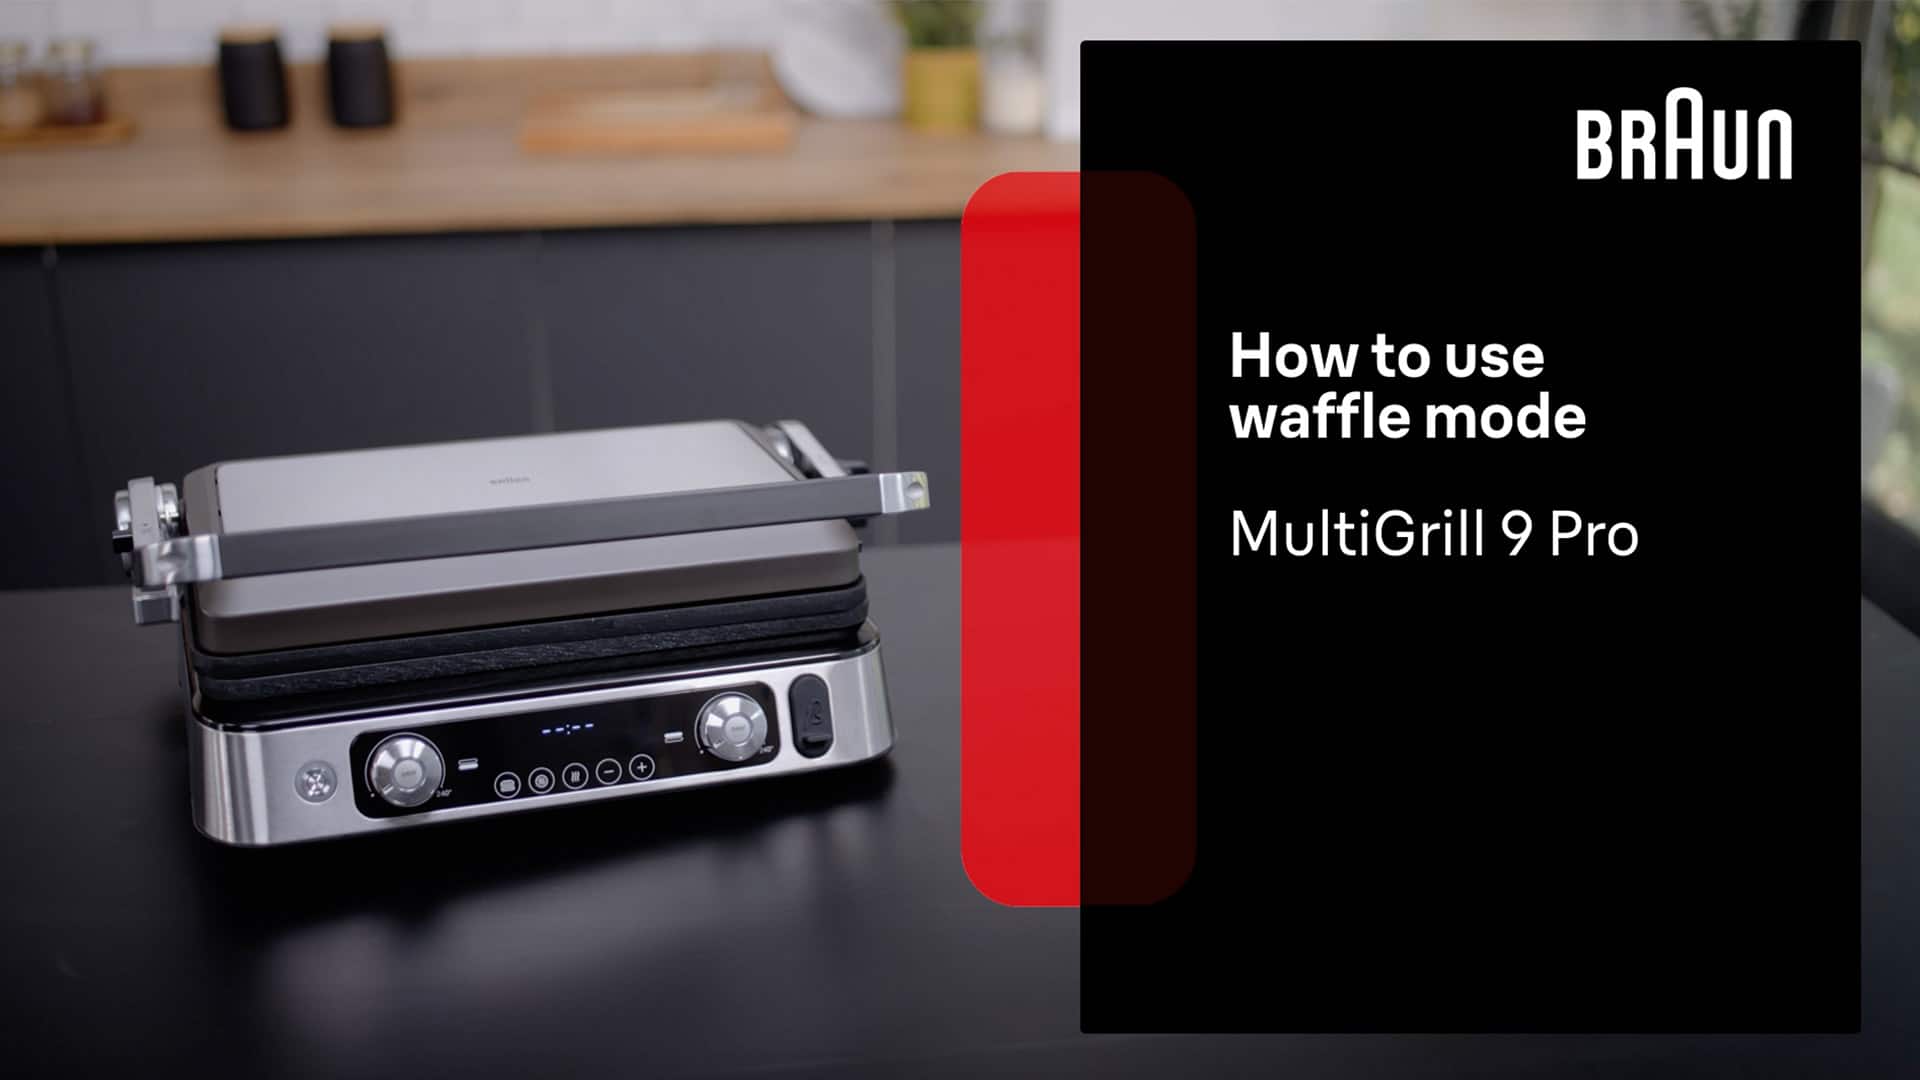 Braun MultiGrill 9 Pro | How to Use the Waffle Mode